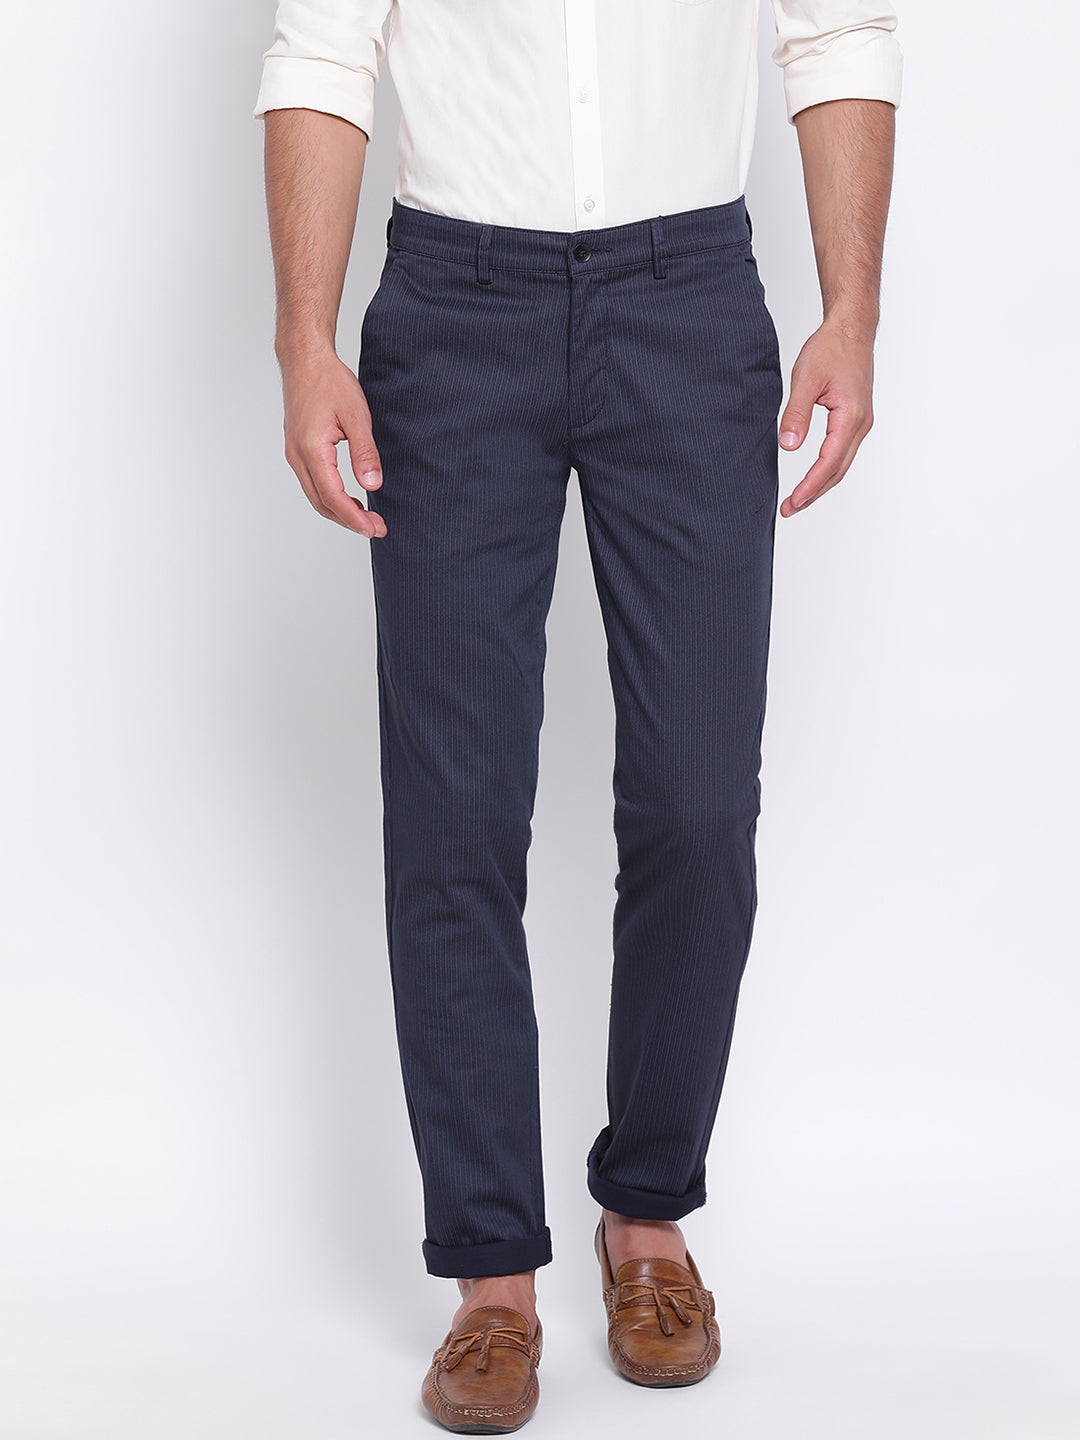 Navy Blue Solid Ultra Slim Fit Trouser